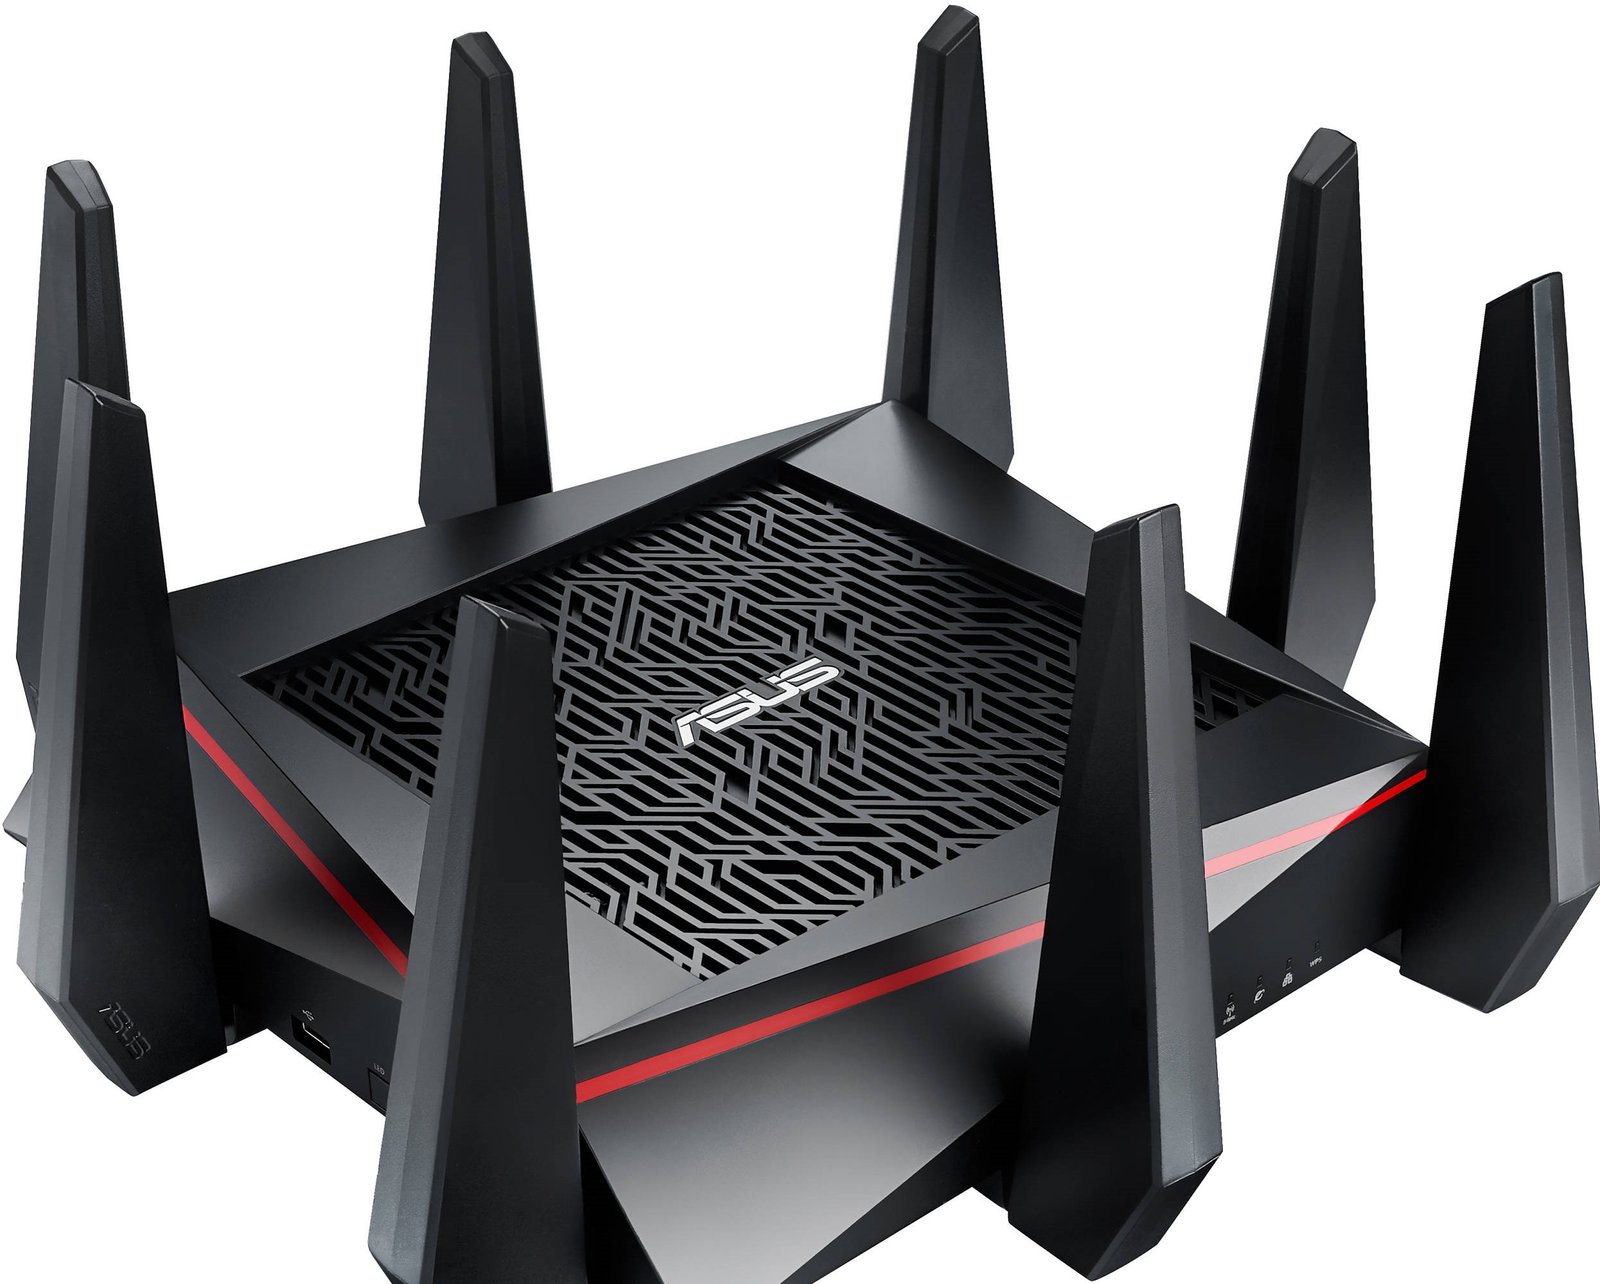 ASUS Wifi Routers